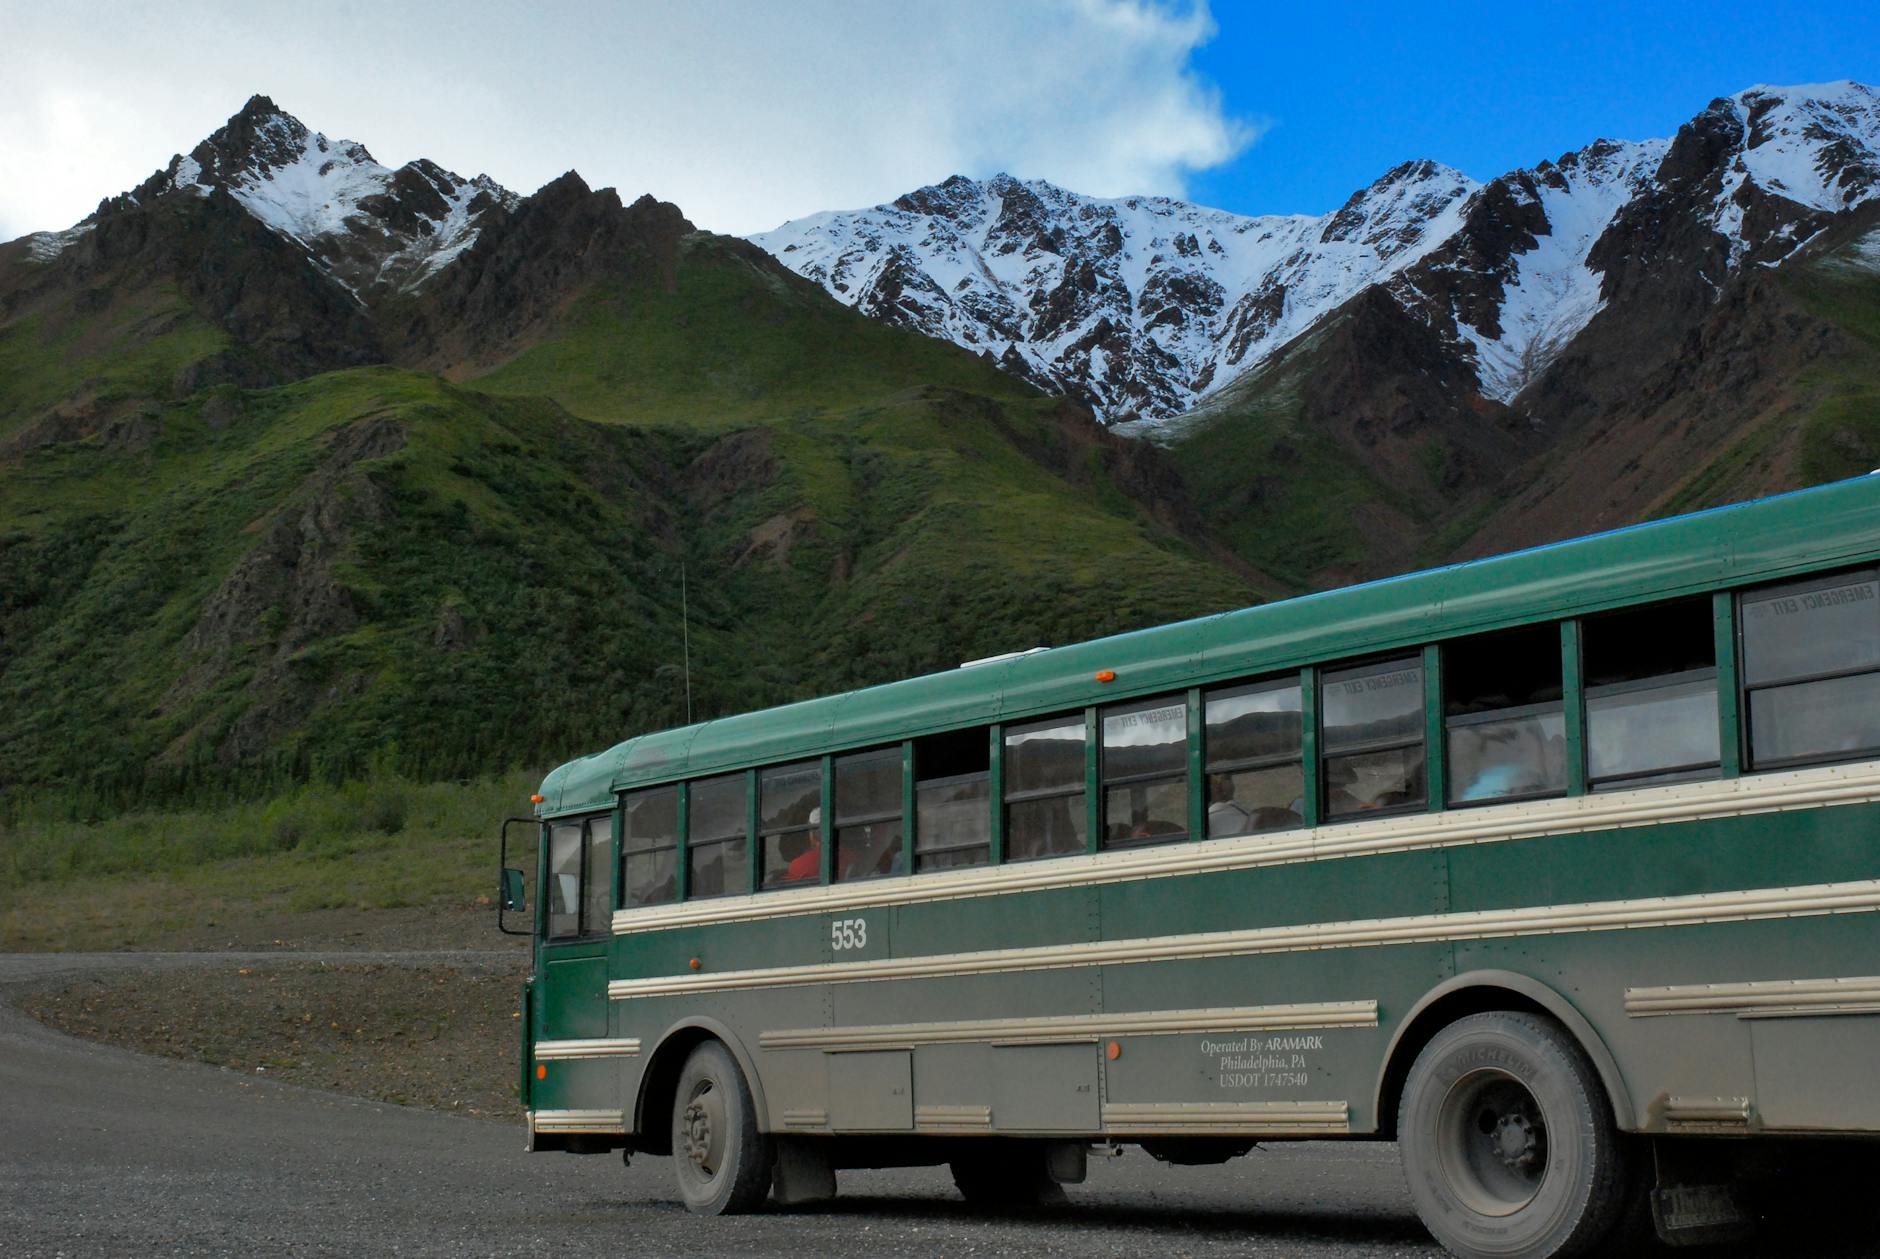 green and white buss on gray concrete top road across green mountains under cloudy sky